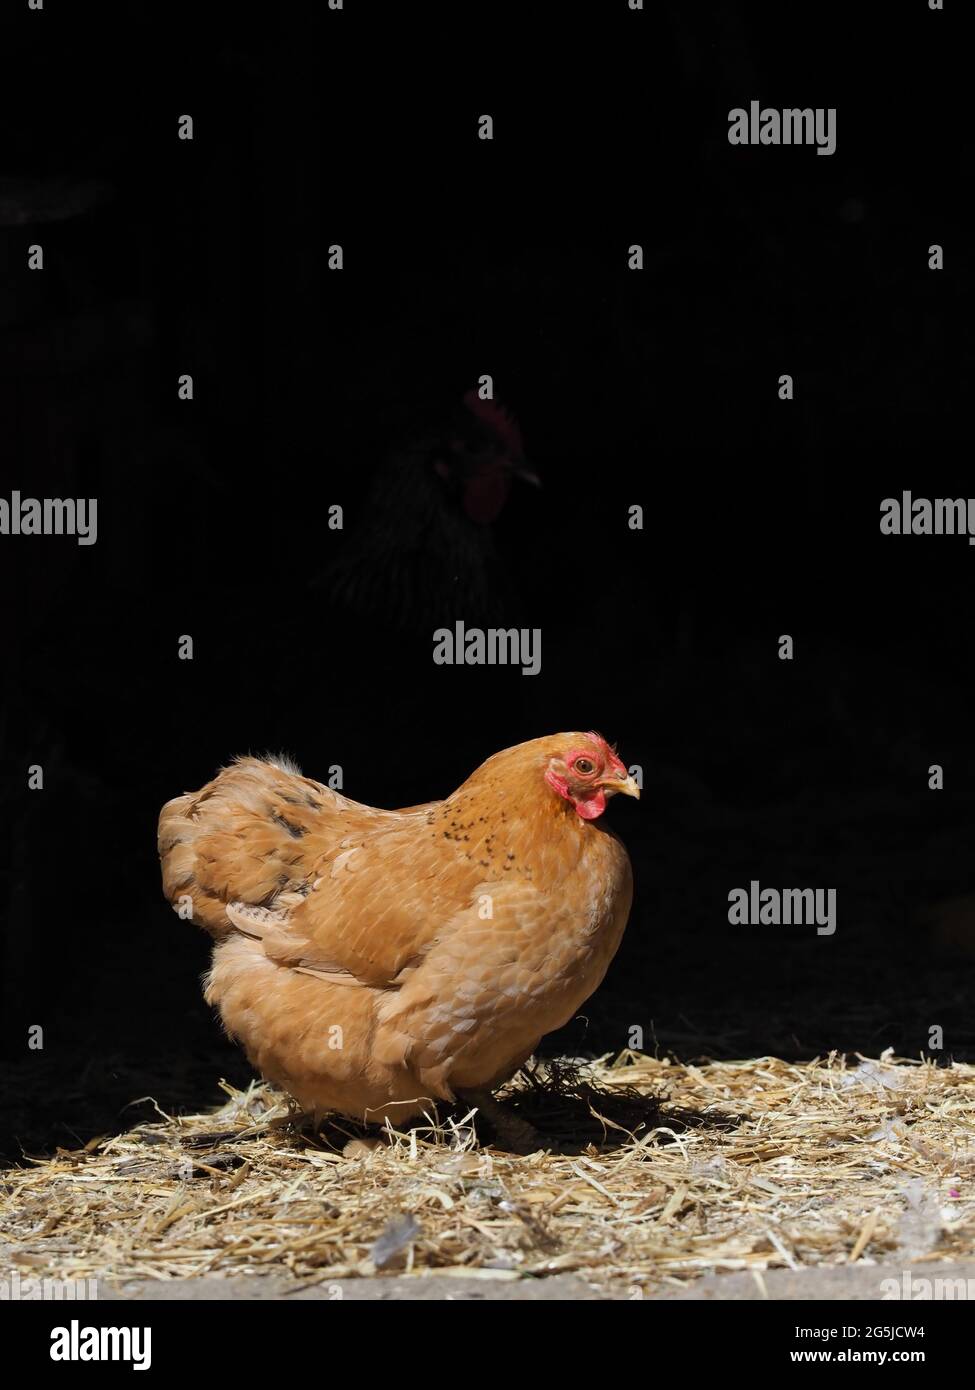 A Rode Island Red hen against a black background. Stock Photo